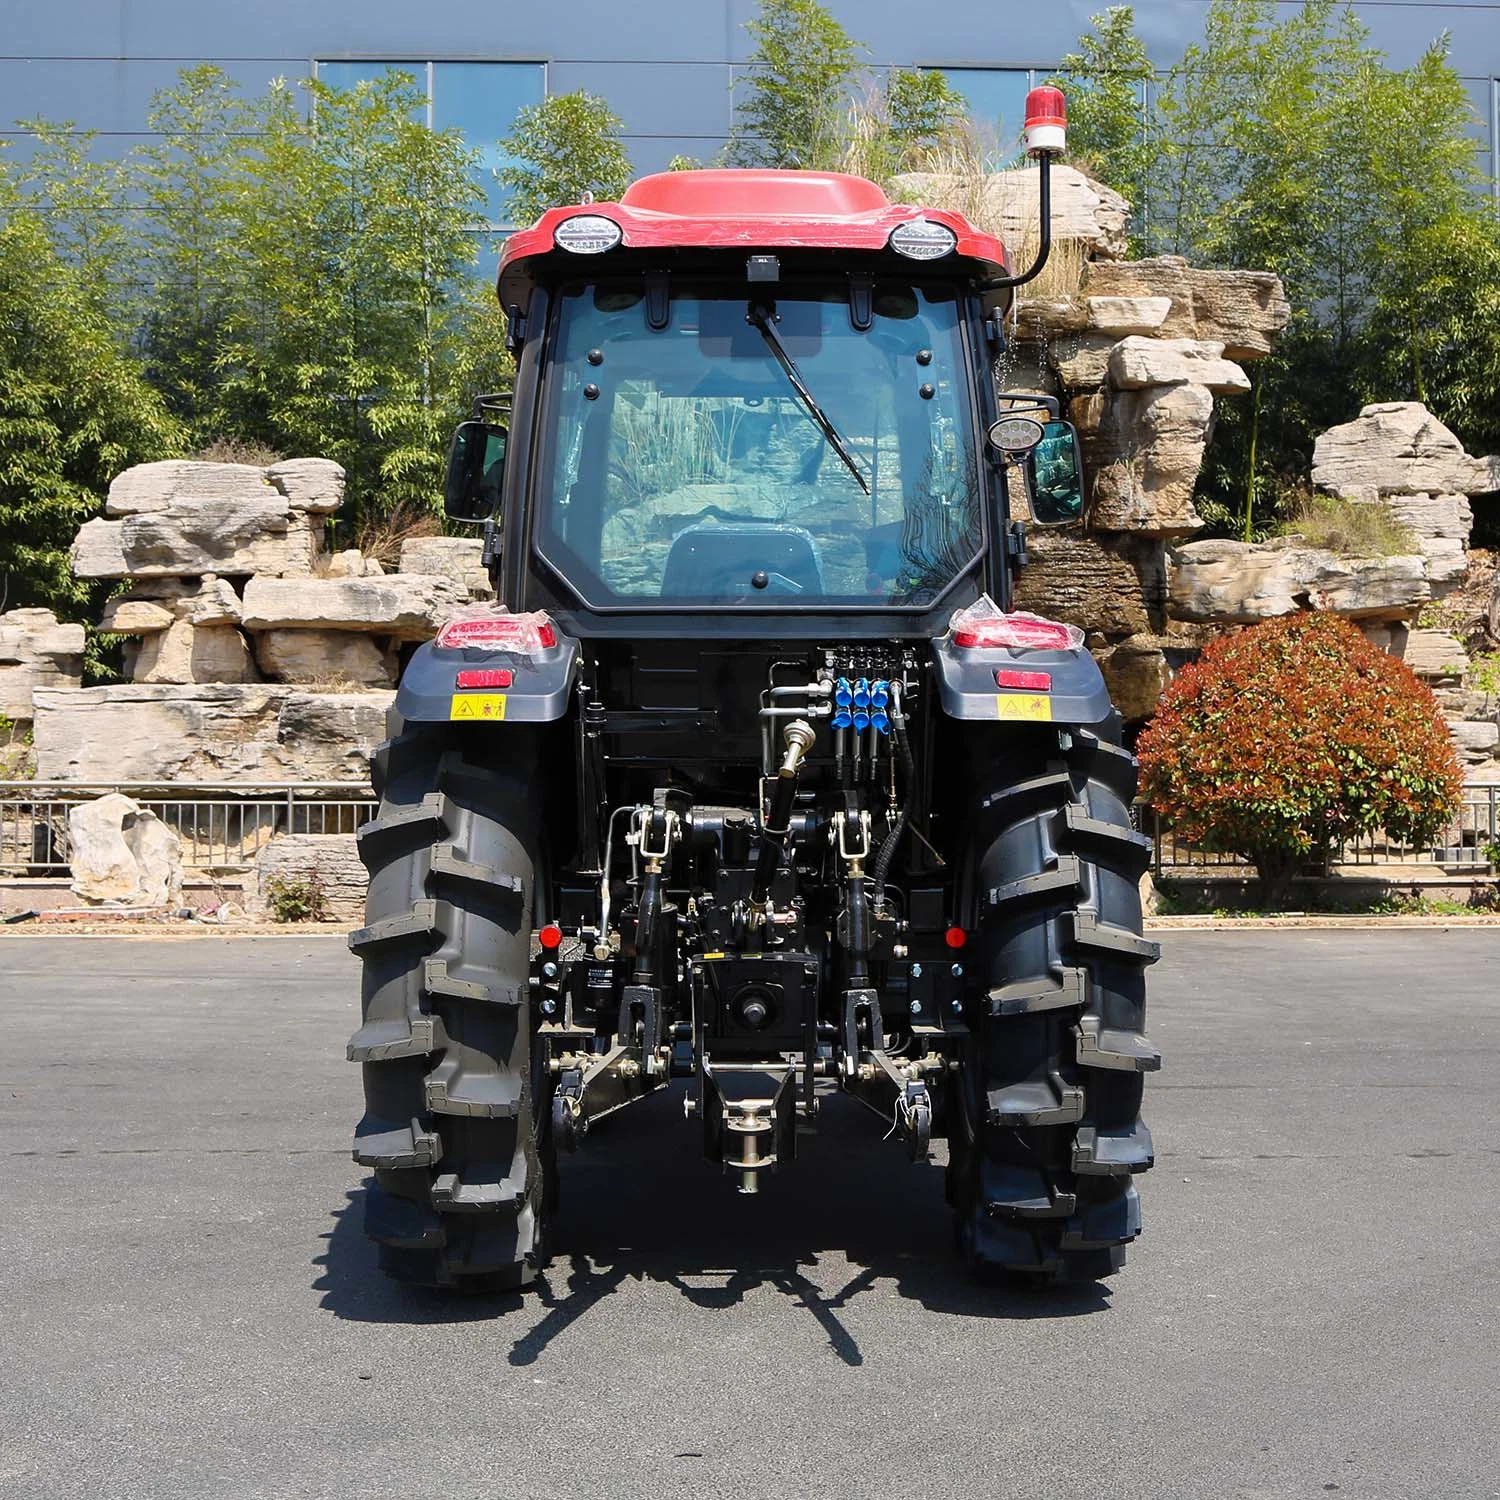 The Best-Selling High-Quality Farm Tractors Certified by ISO and CE in China